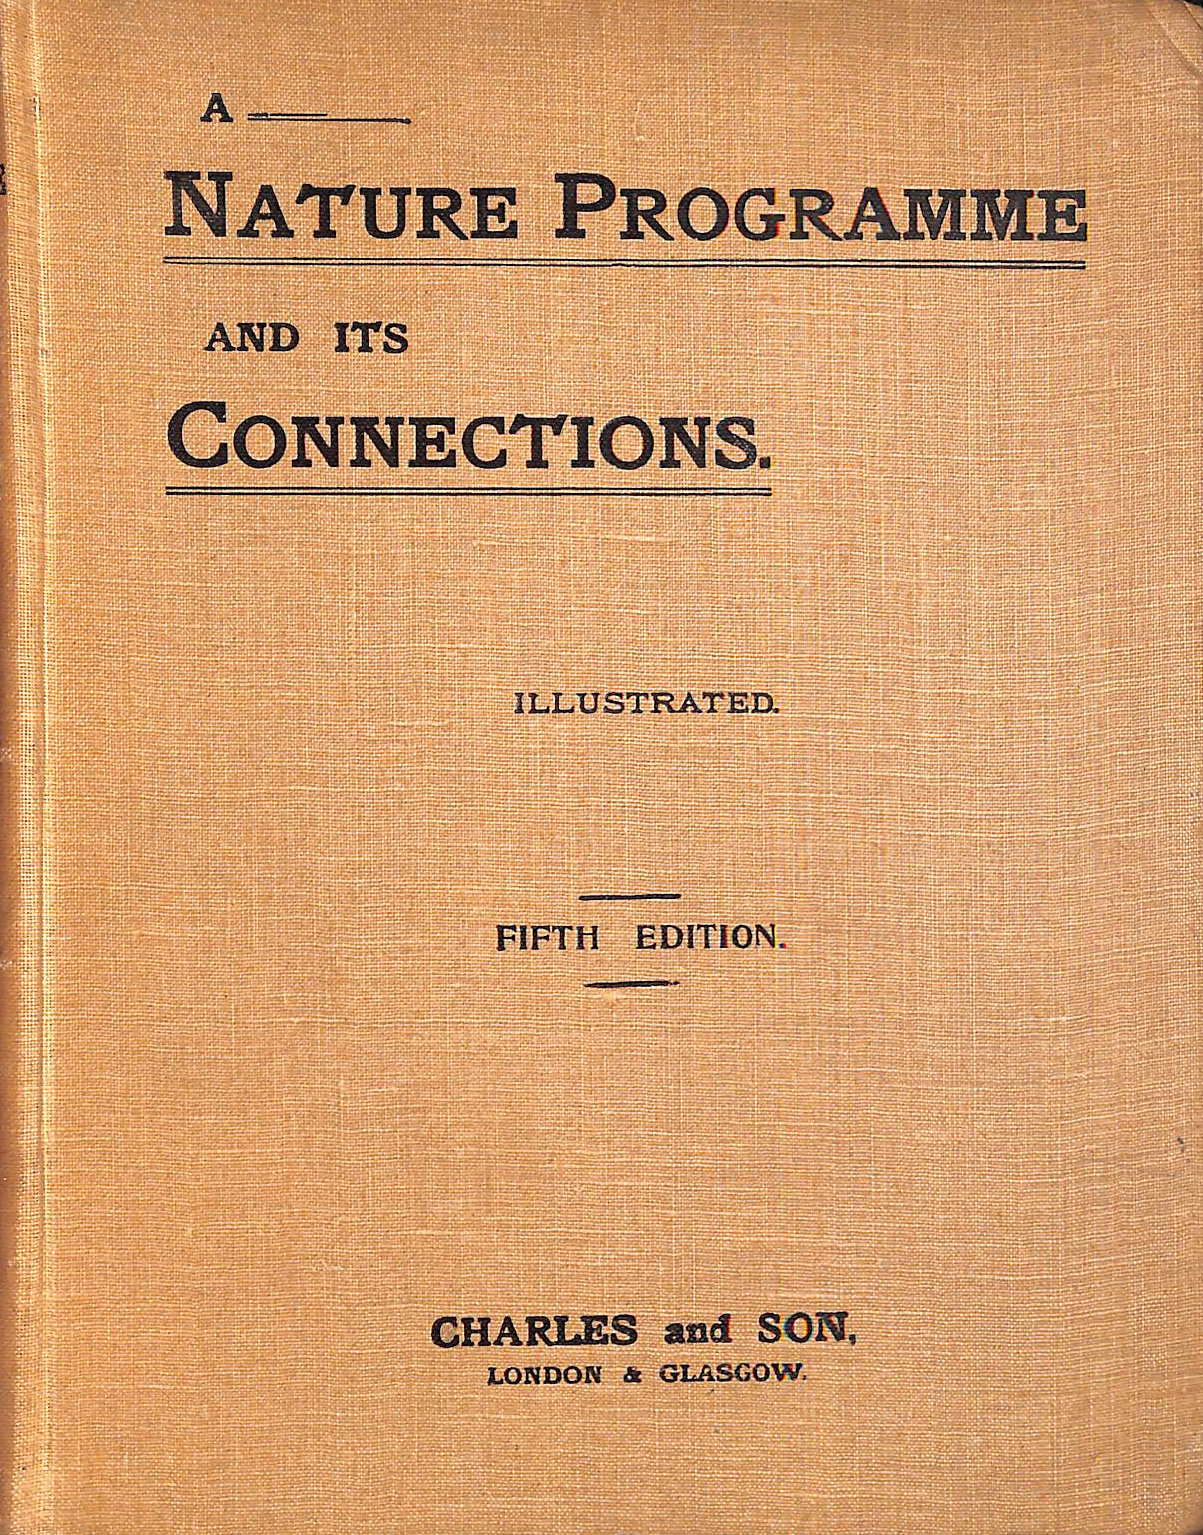 JEANIE MACKENZIE - A Nature Programme and its Connections ... Illustrated